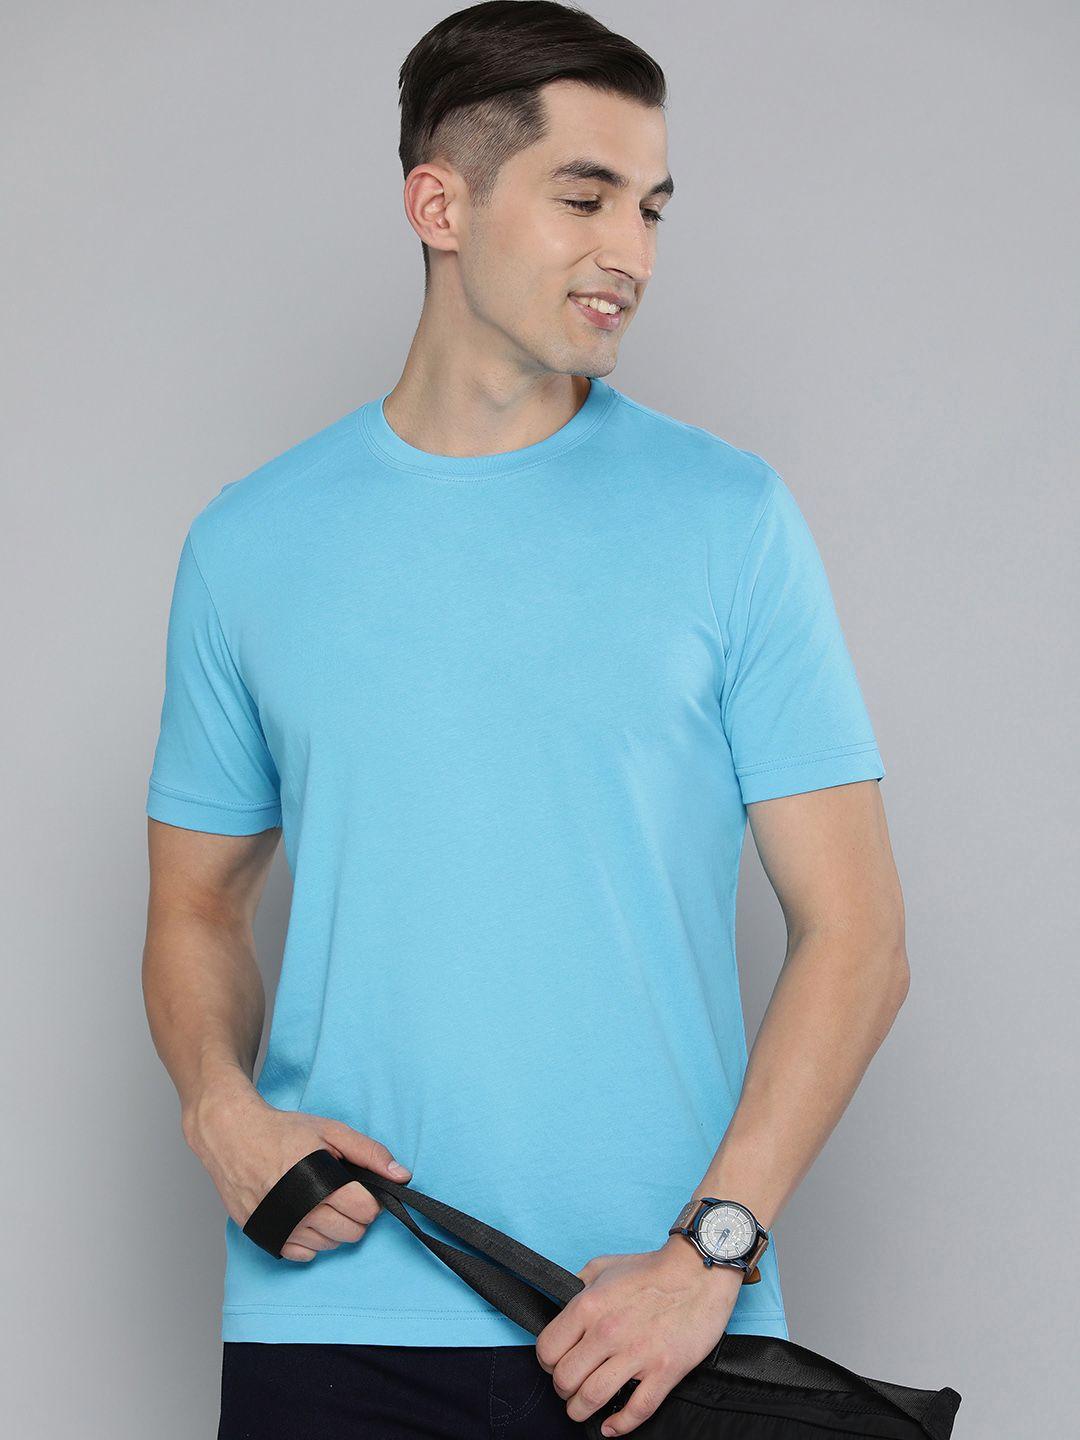 here&now men round neck pure cotton t-shirt